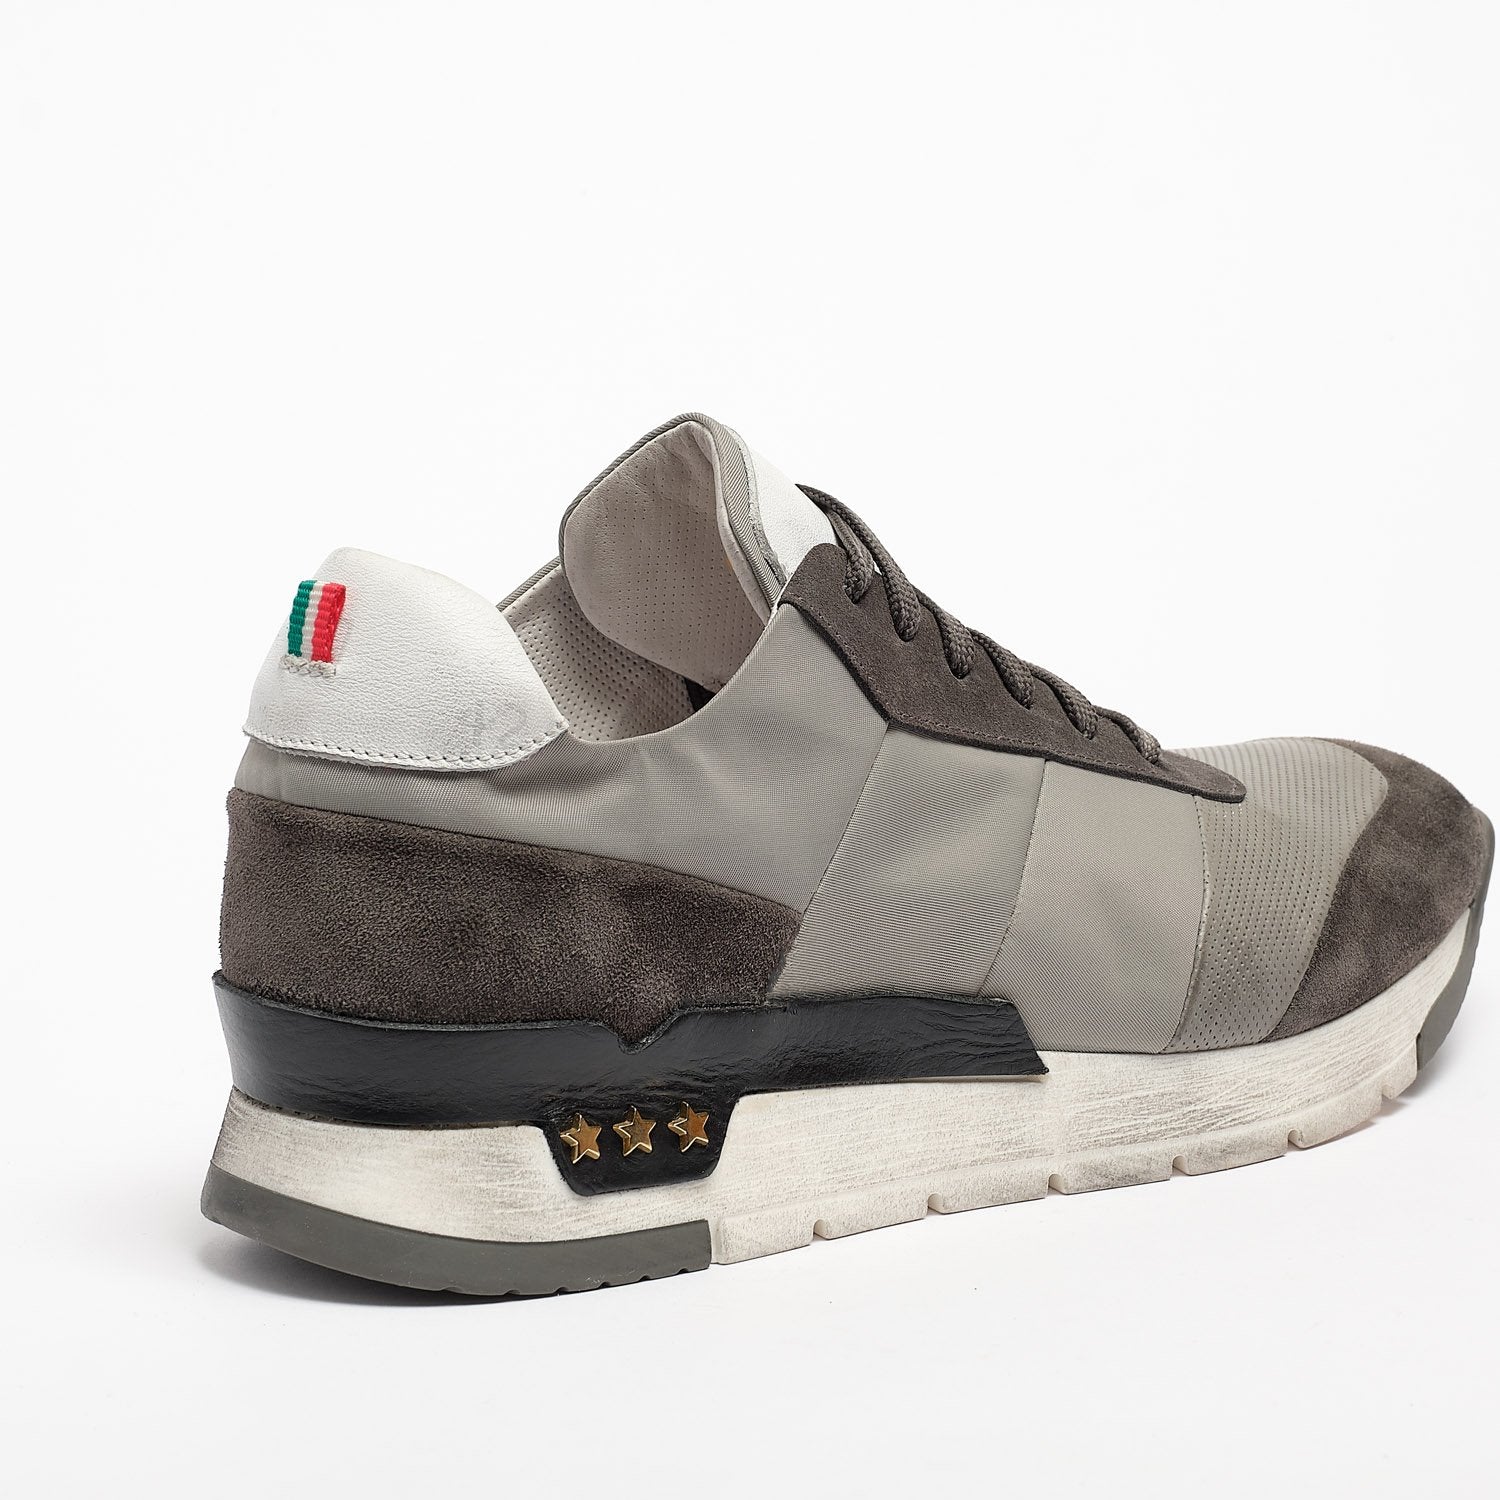 Mundialito Laced Shoes suede and nylon with vacchetta leather insert grey